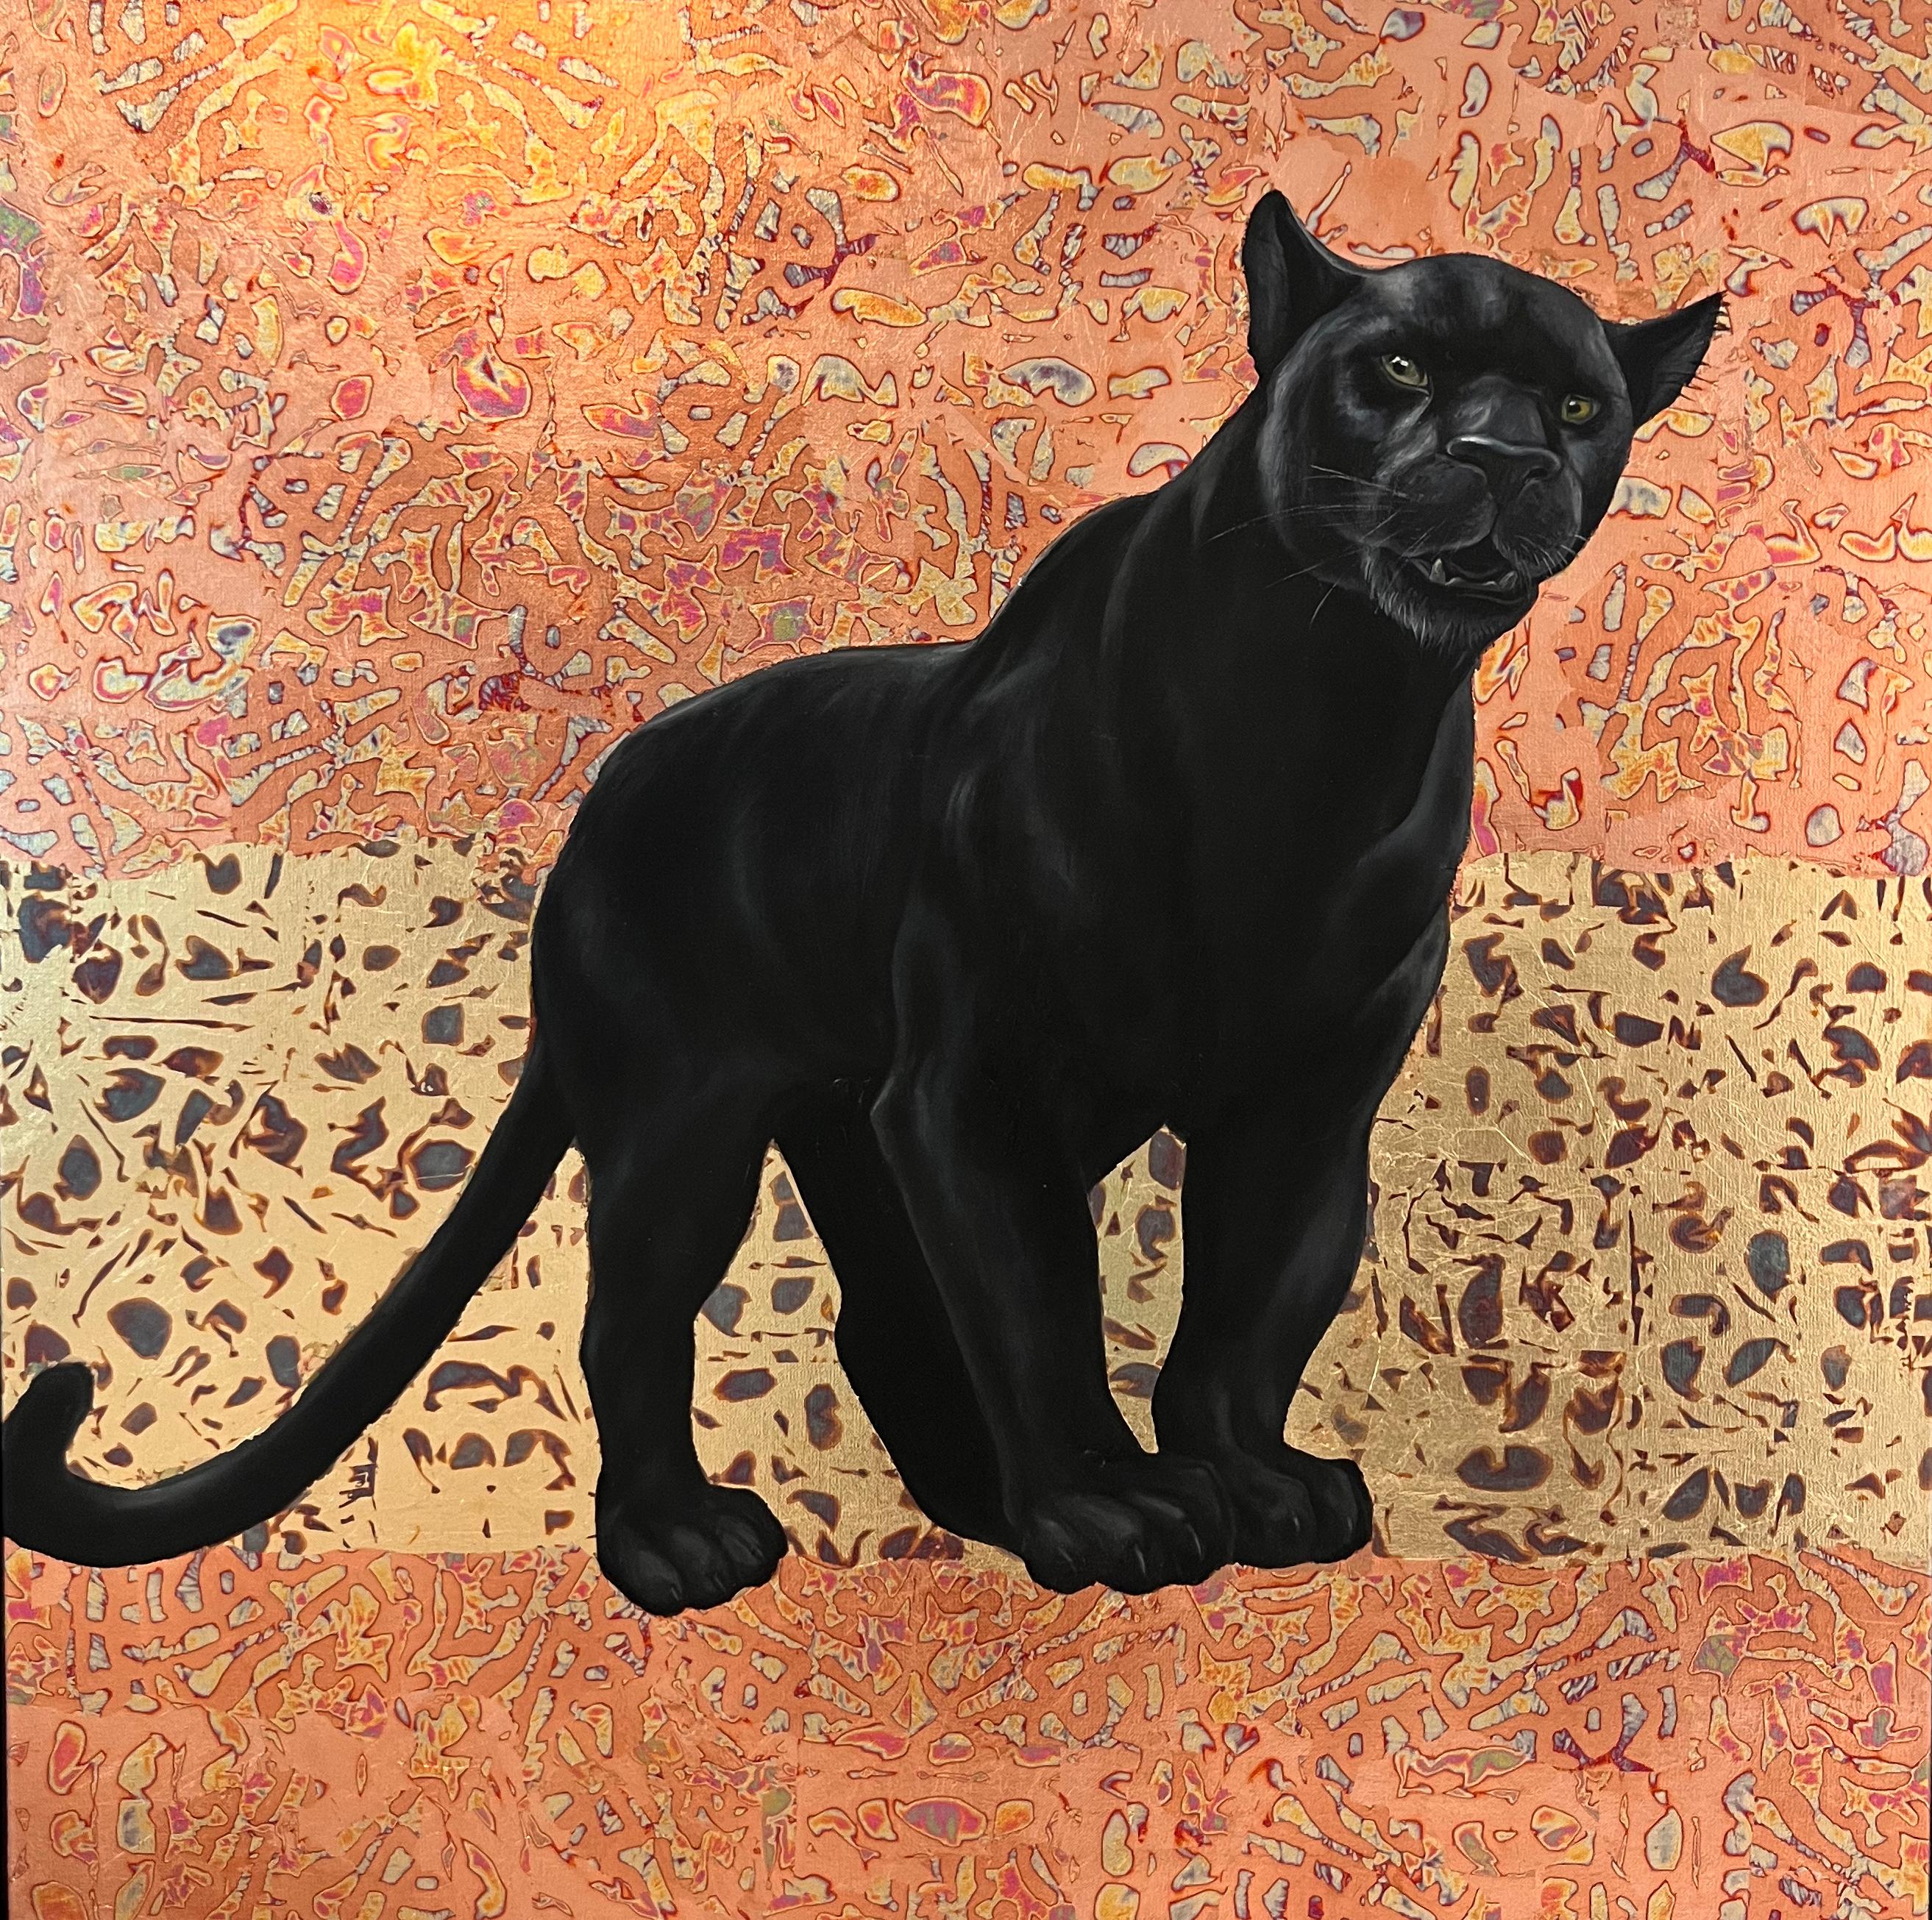 "Panther" Oil painting 39" x 39" inch by Alina Shimova 